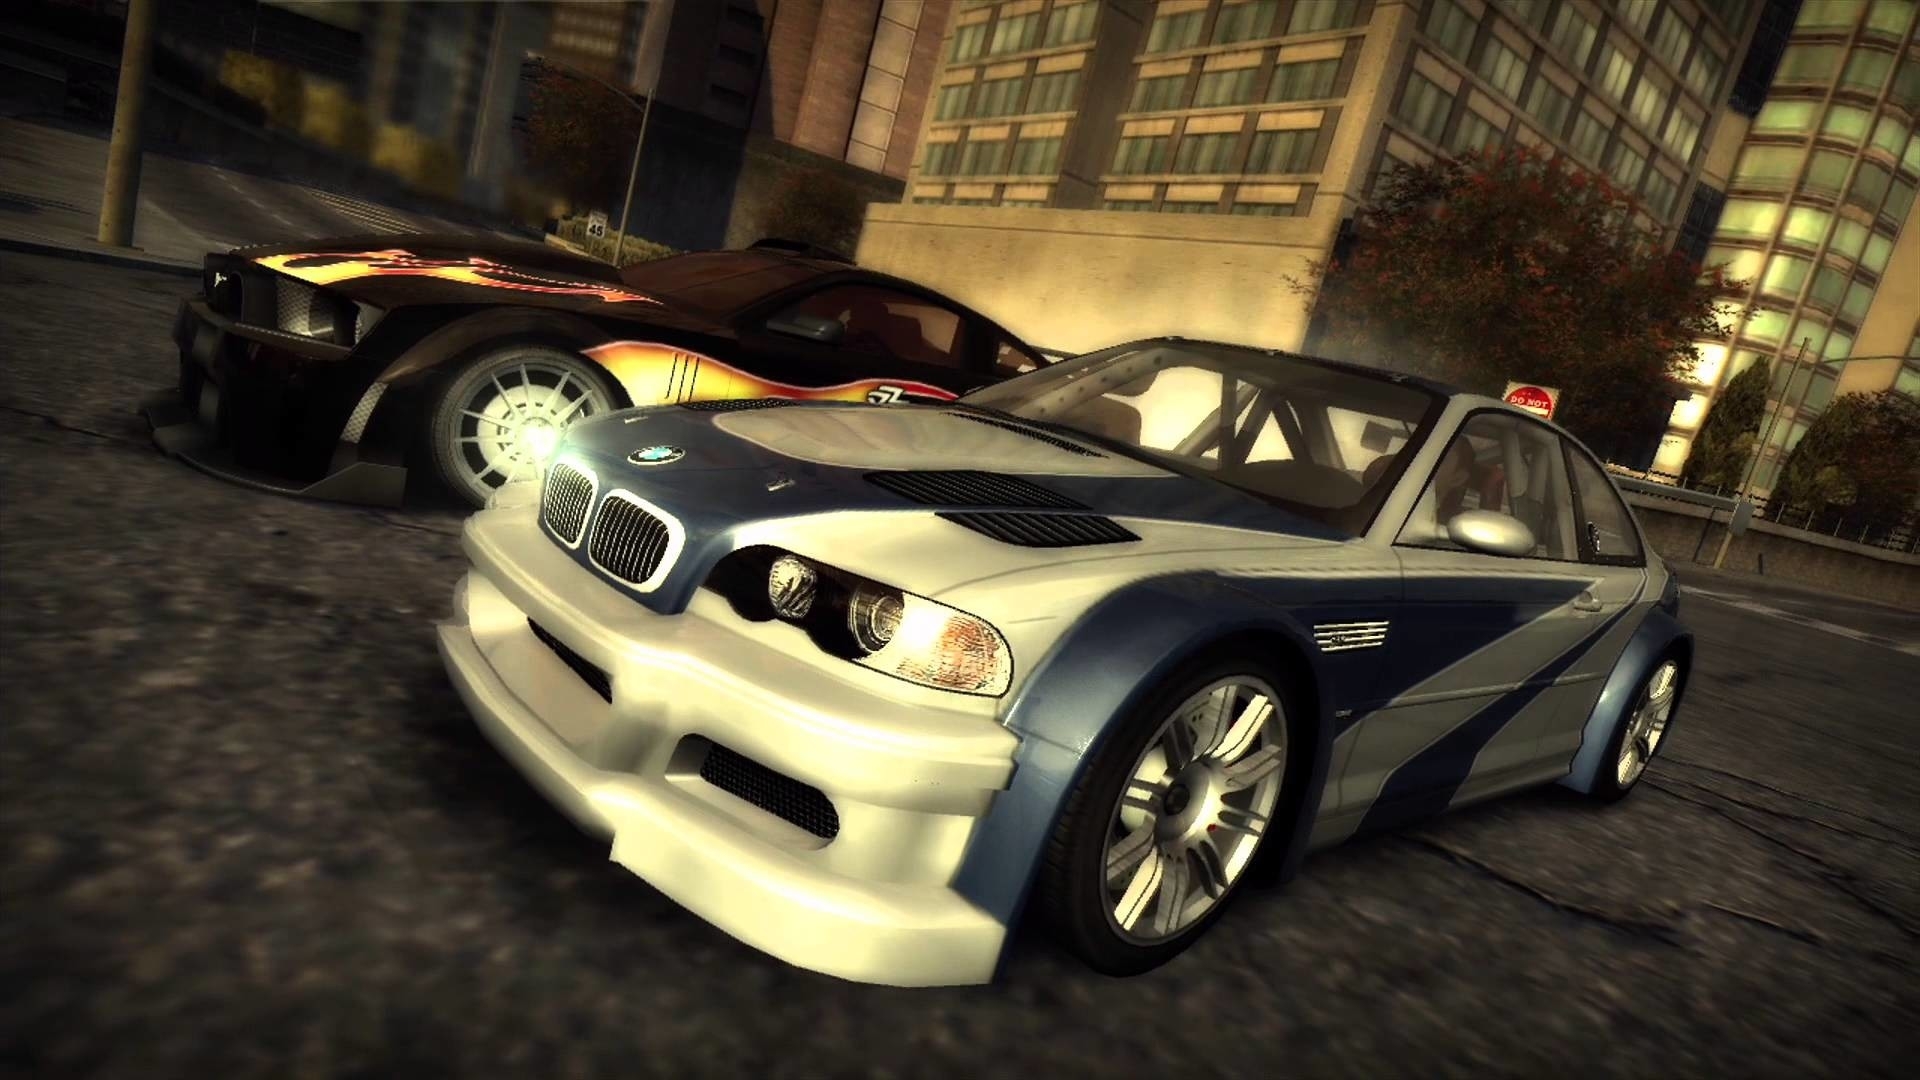 NFS MW 2005 Рэйзор. NFS 2005 BMW. Нфс МВ 2005. NFS most wanted 2005 русская версия. Games need speed most wanted